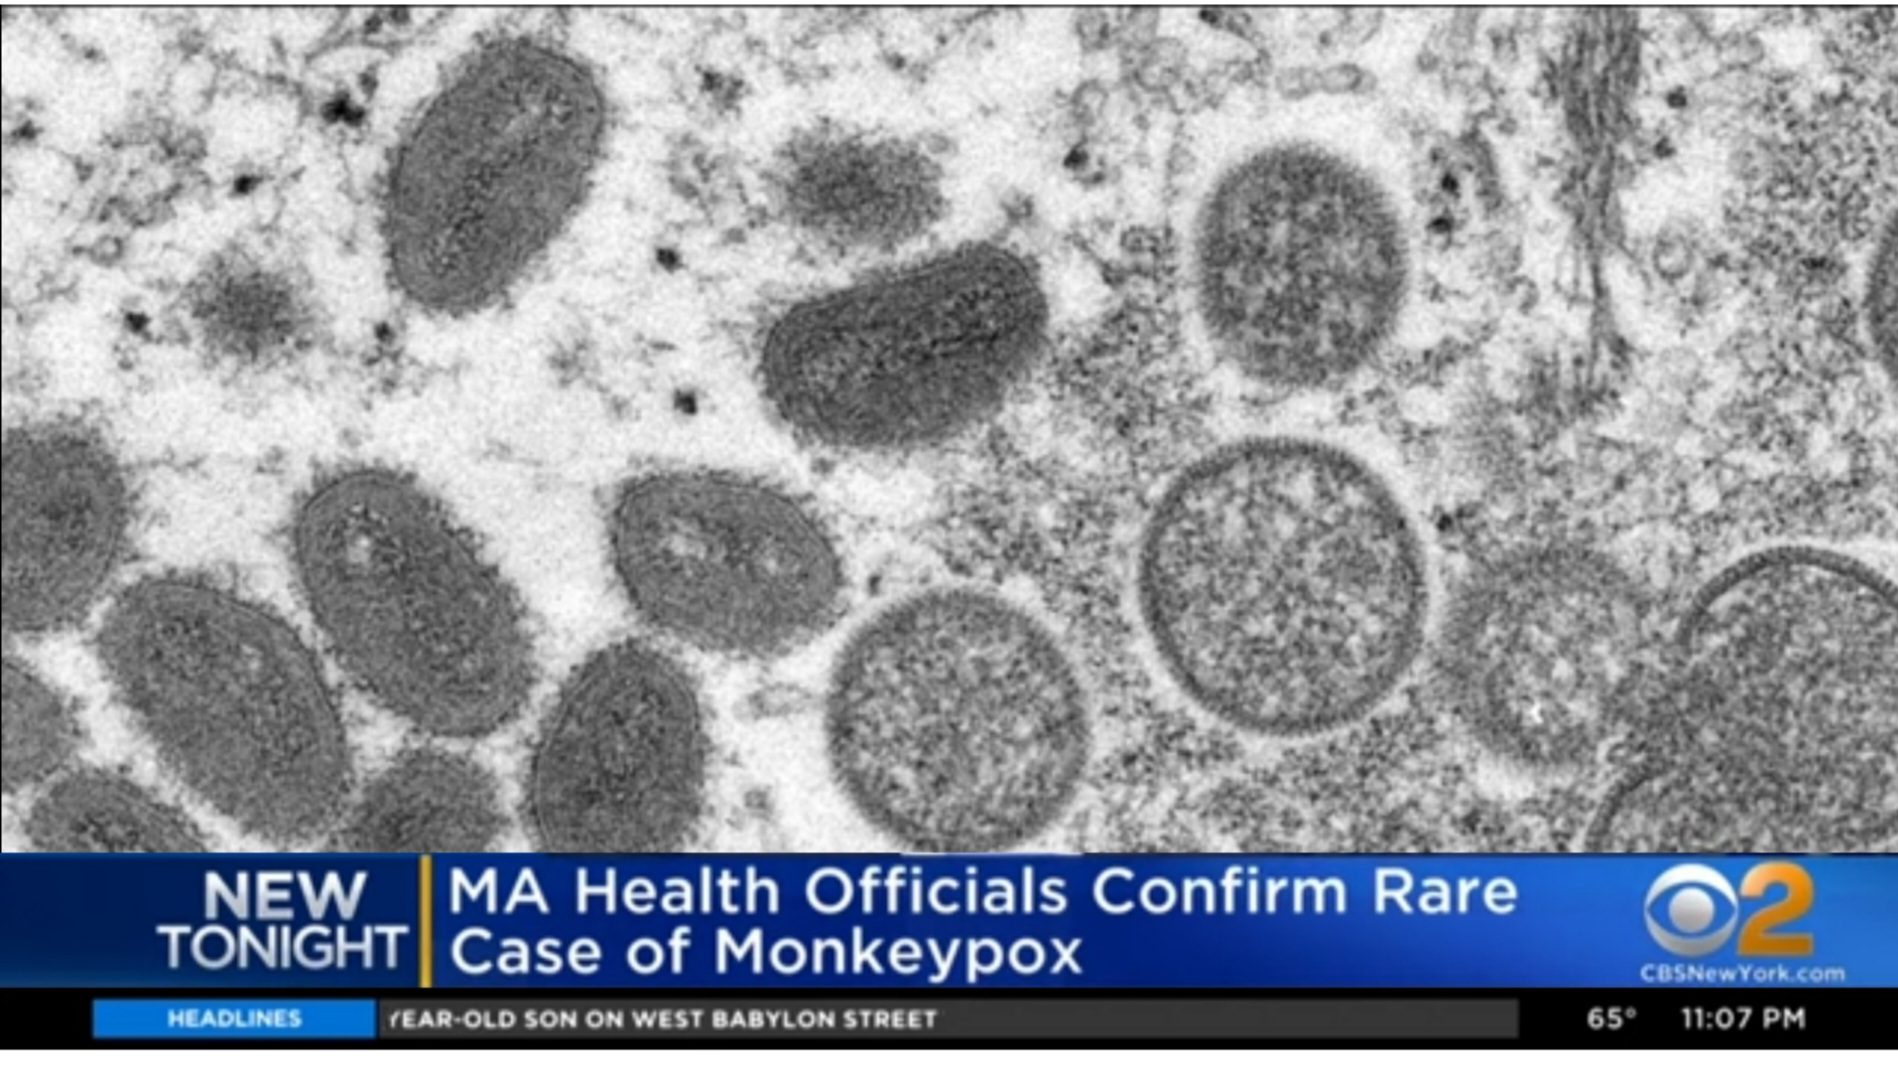 Here We Go Again: Biden Administration Buys Millions of Doses of Monkeypox Vaccine After Case is Confirmed in Massachusetts – Health Officials Currently Investigating Second Potential Case in NYC